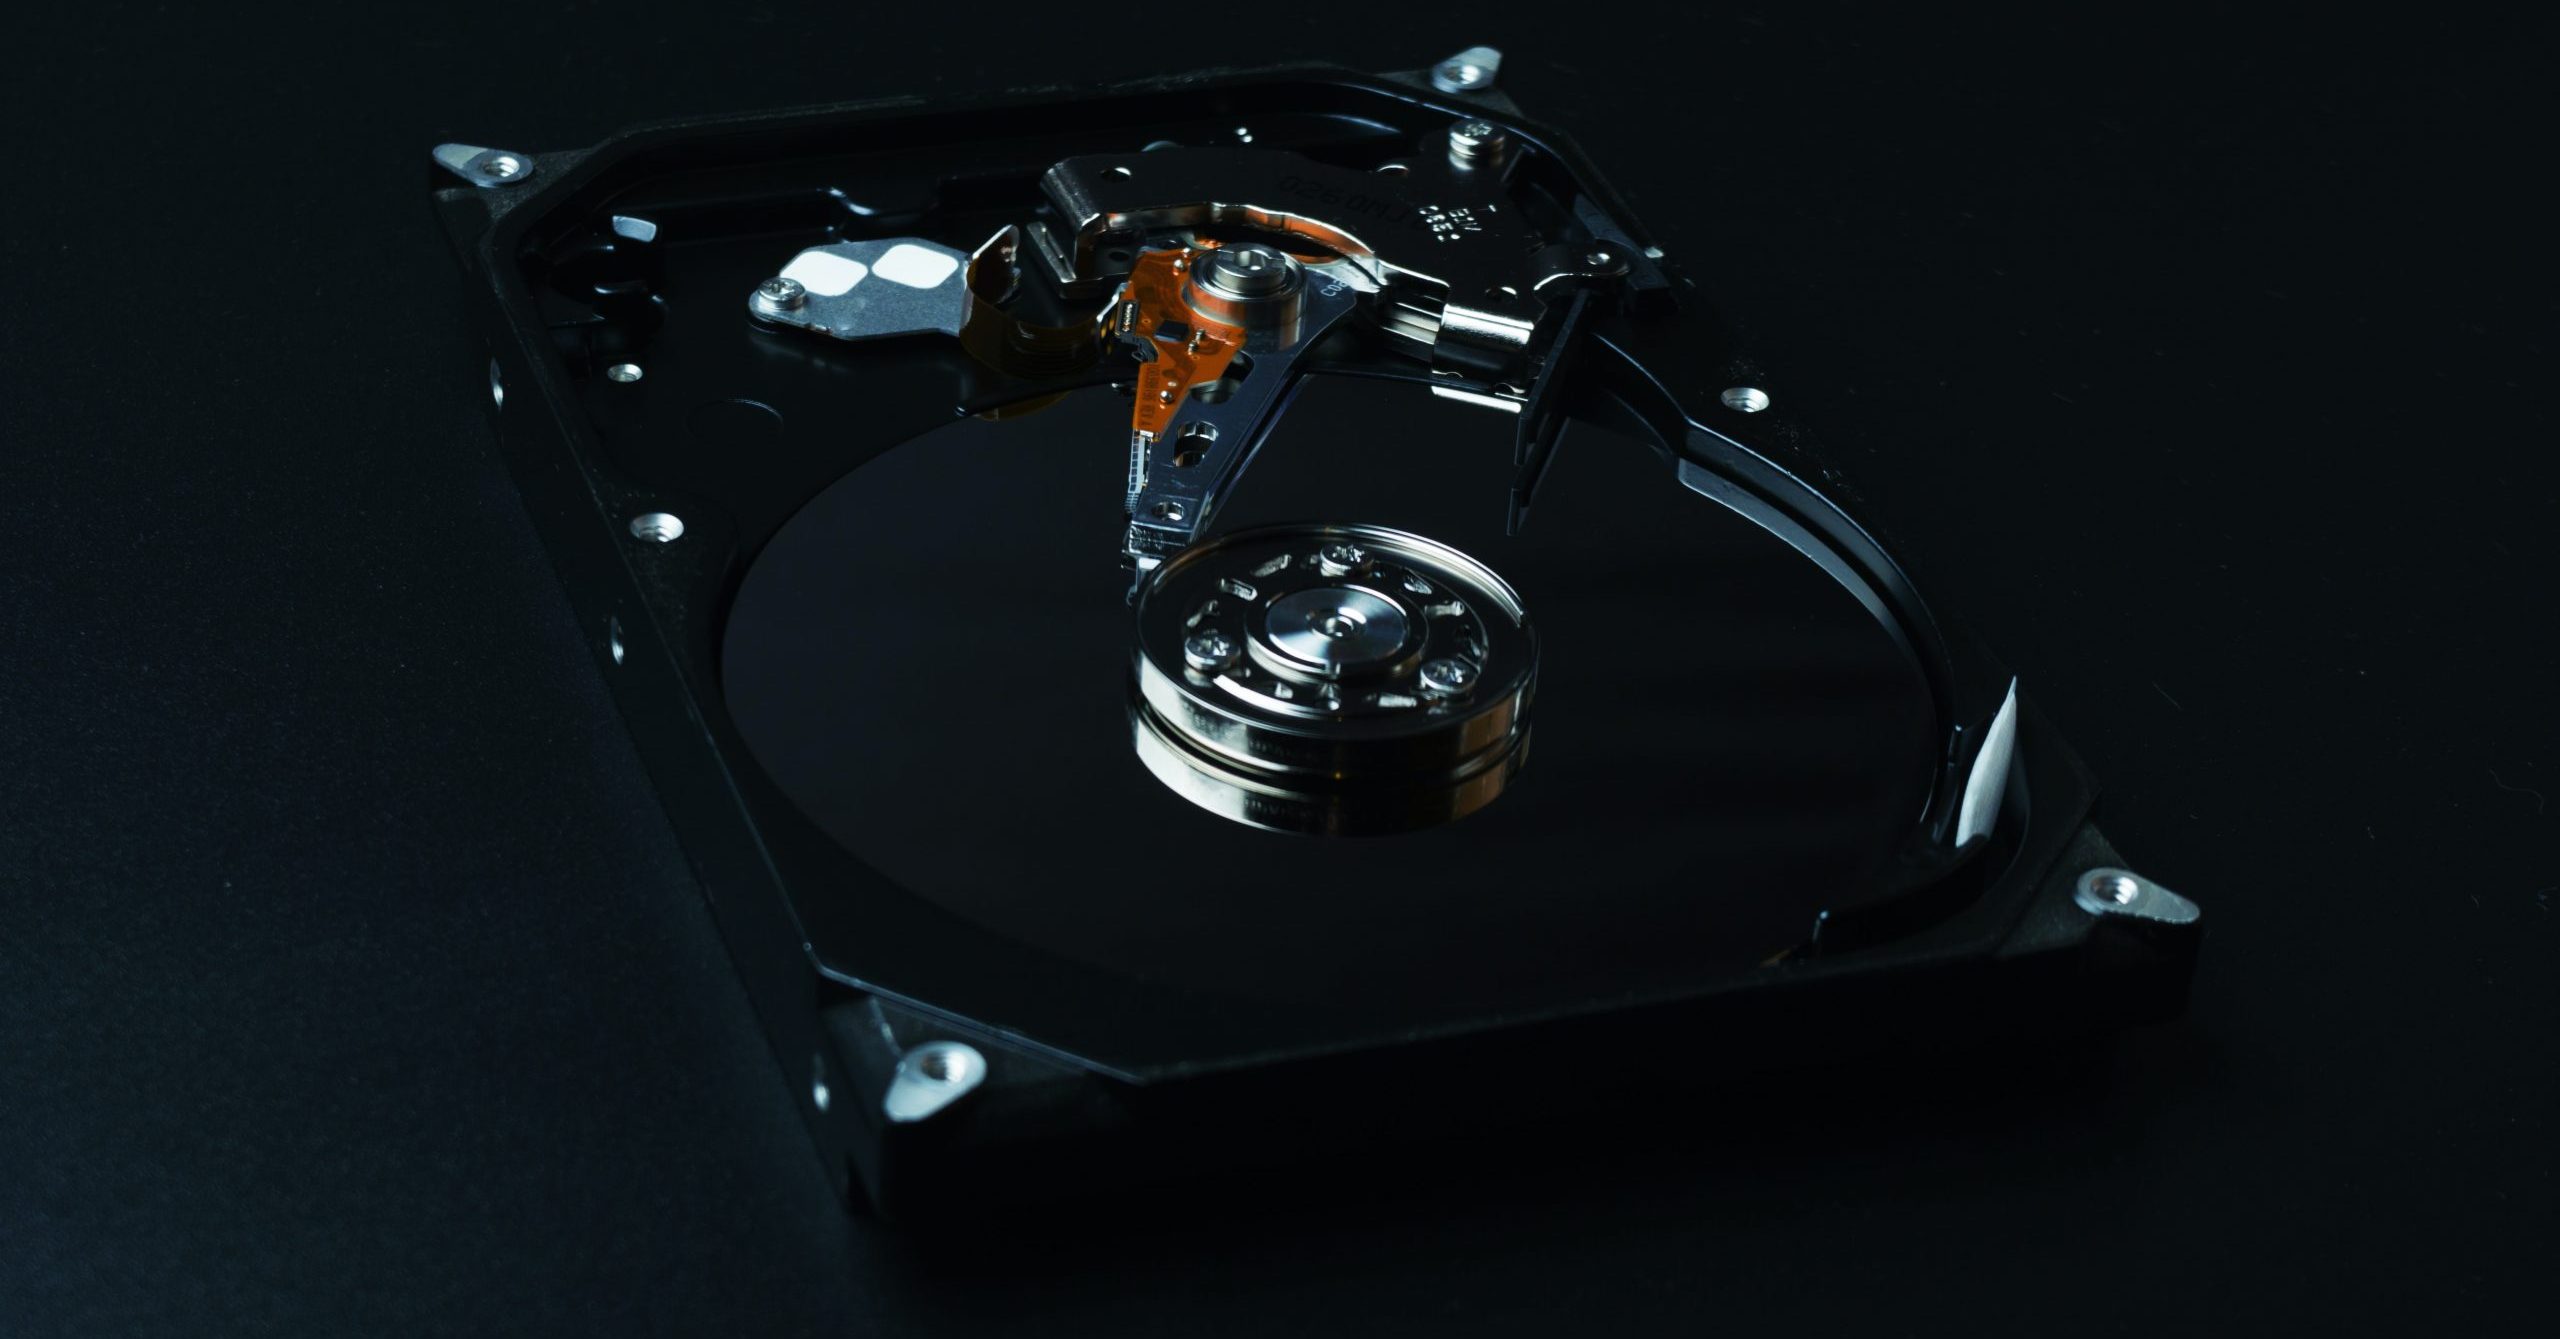 Untwist, Inc.: Using Bare Internal Hard Drives for Data Archiving